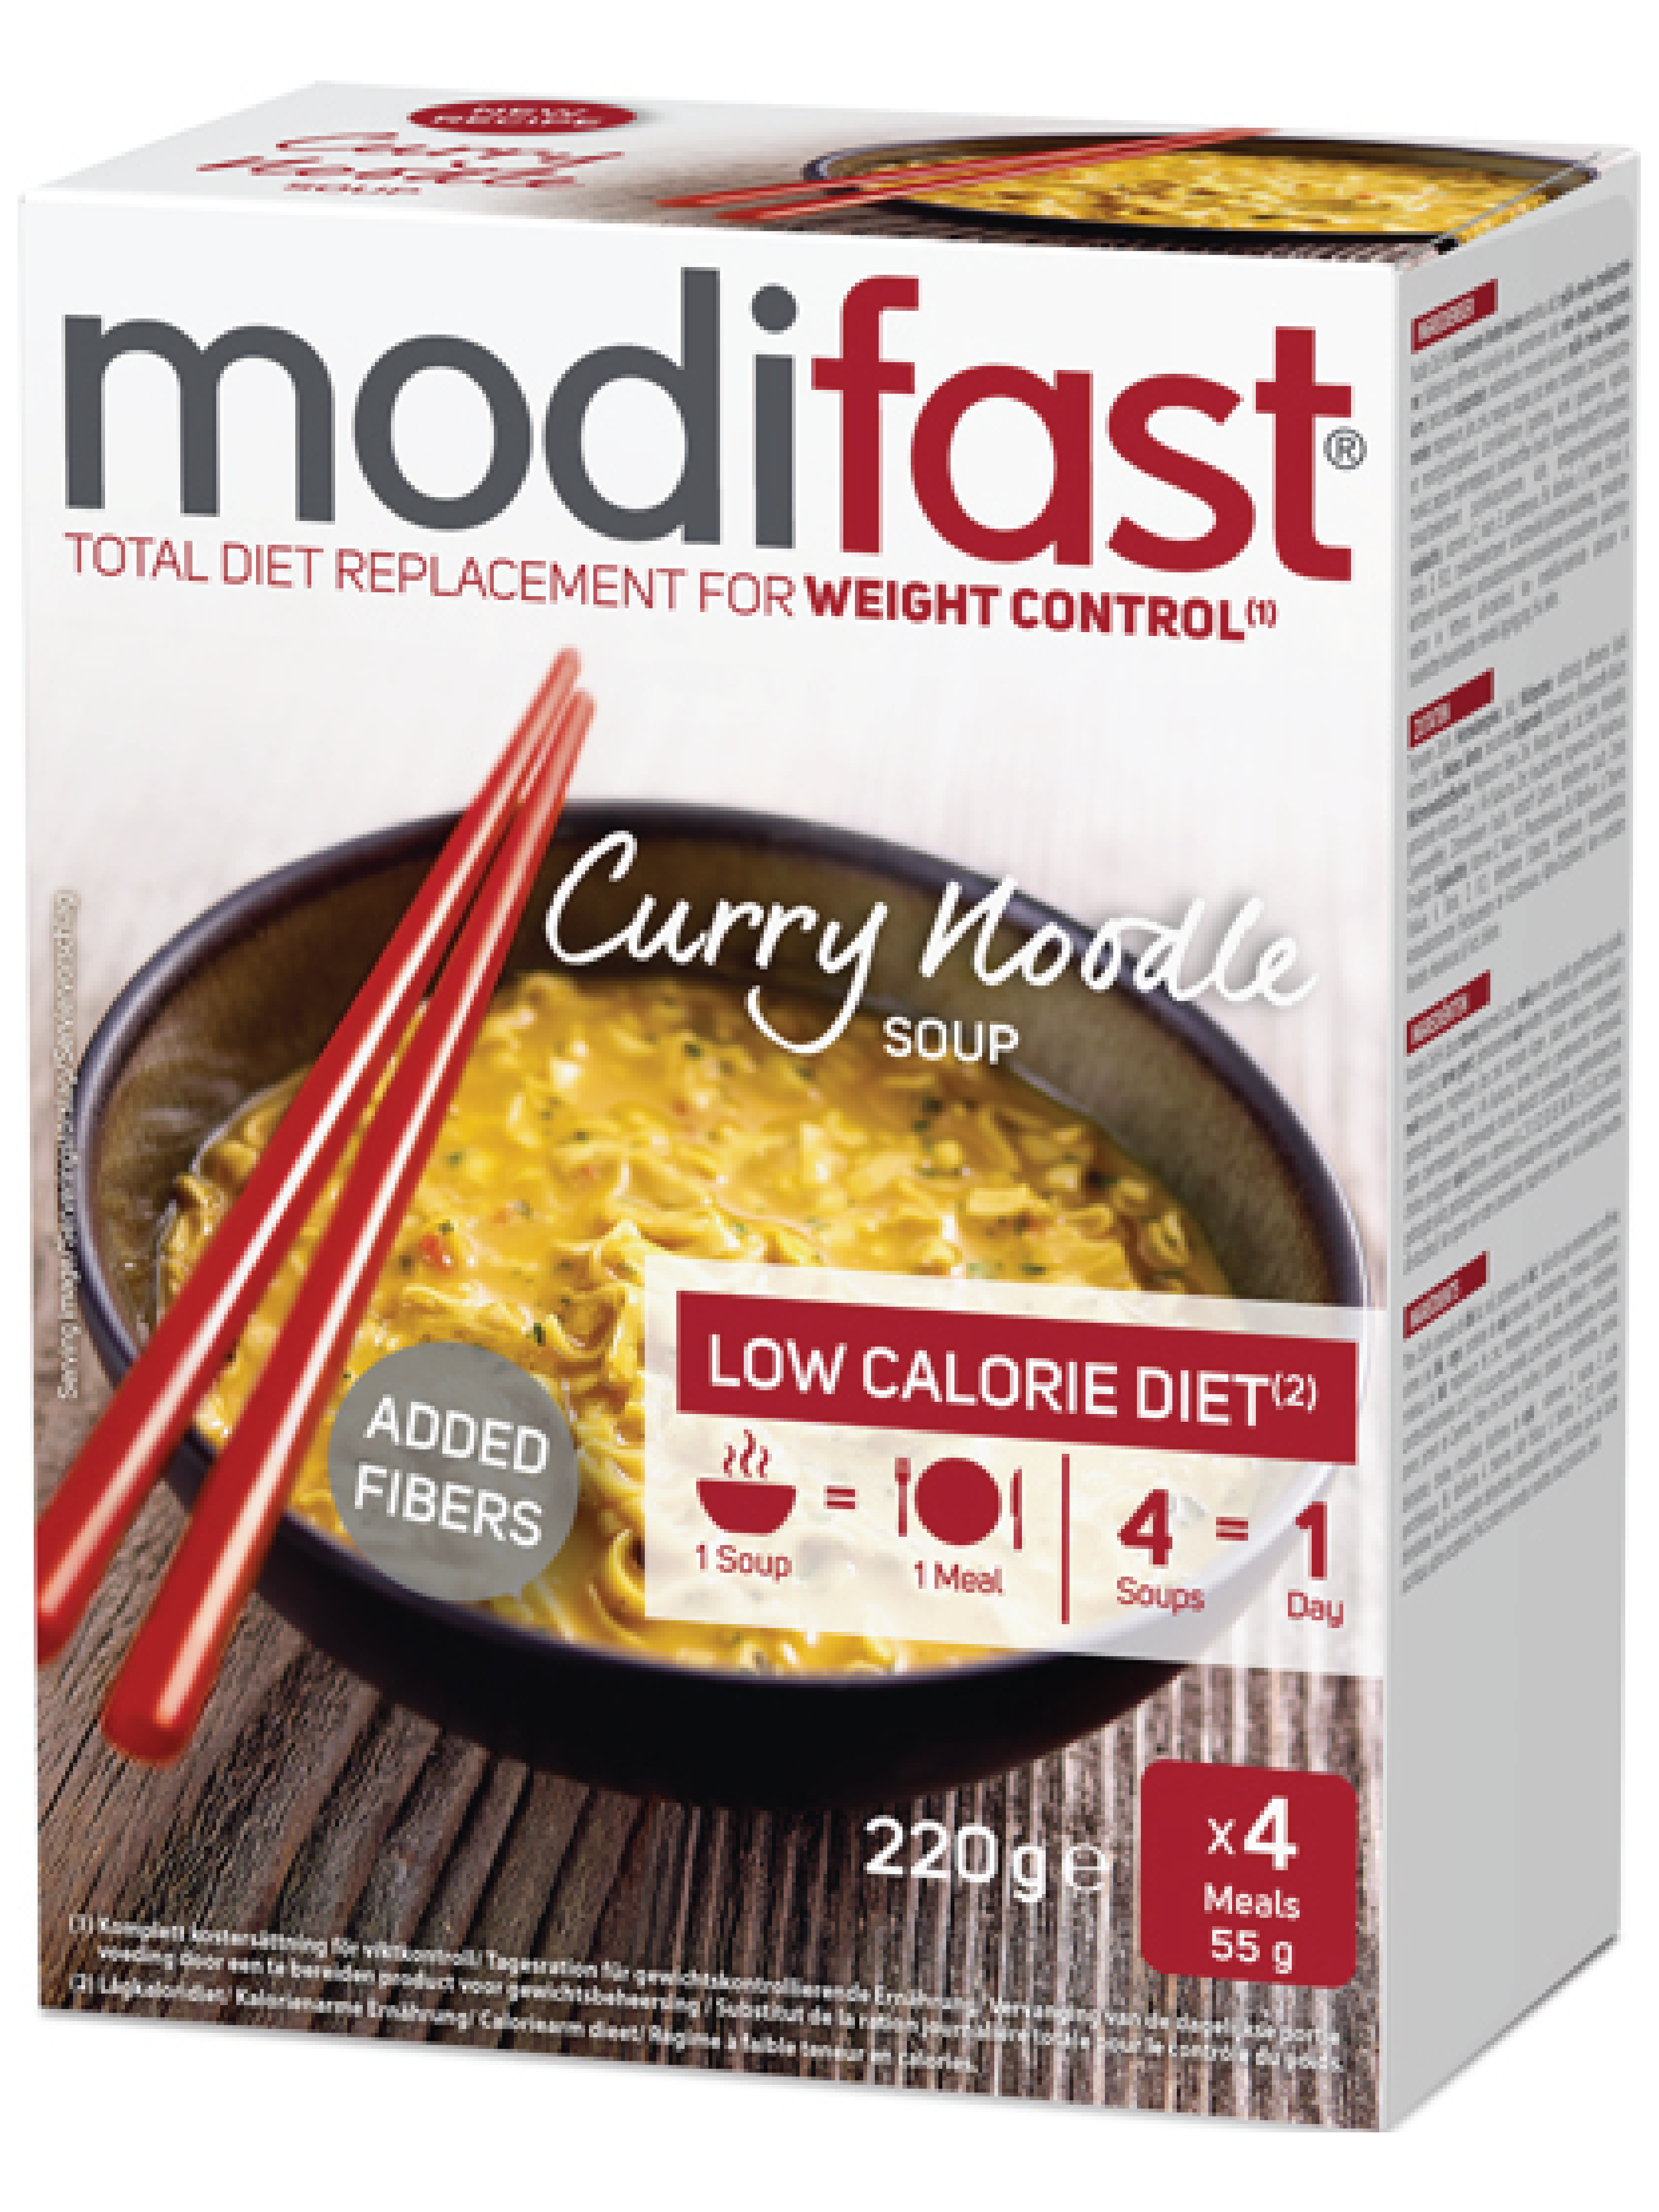 Modifast LCD Nudelsuppe m/curry, 4 x 55 g